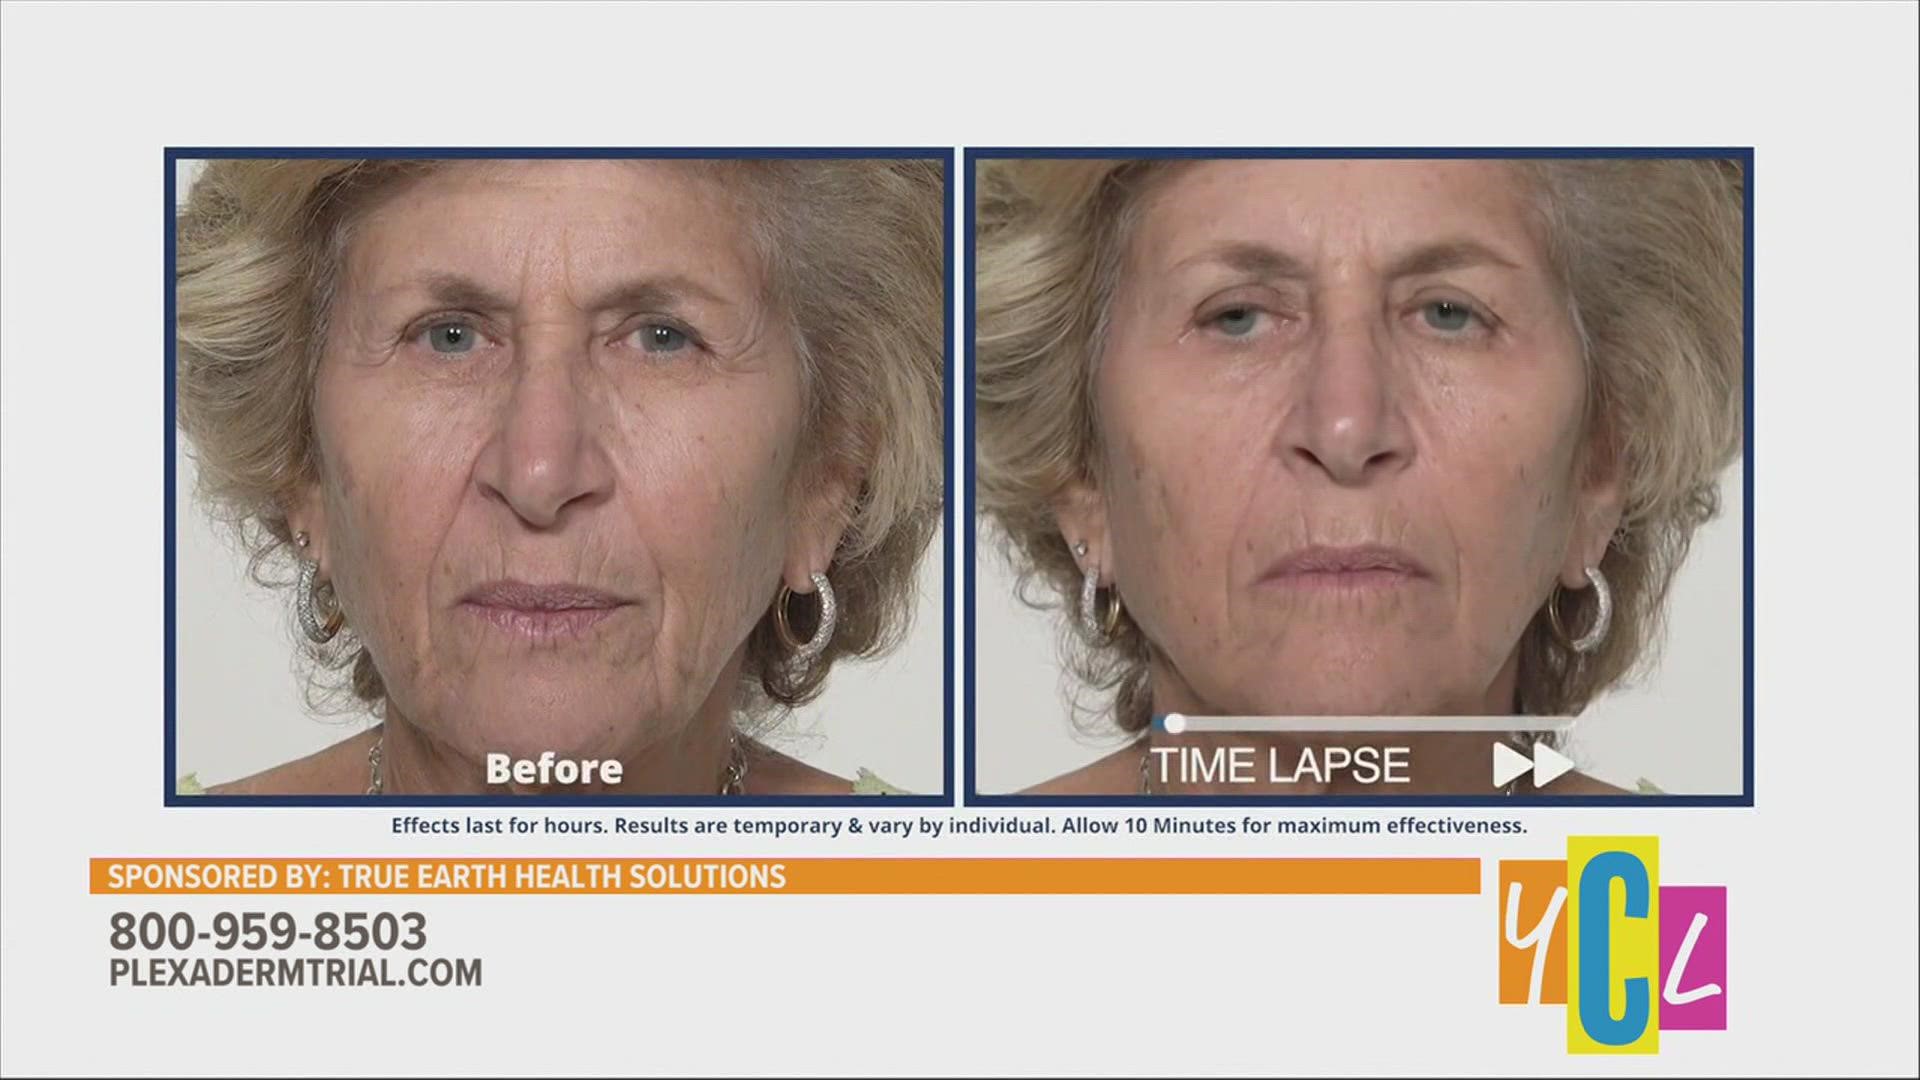 Reduce undereye bags, dark circles and wrinkles from view with real science providing real results. 
This segment paid for by True Earth Health Solutions.